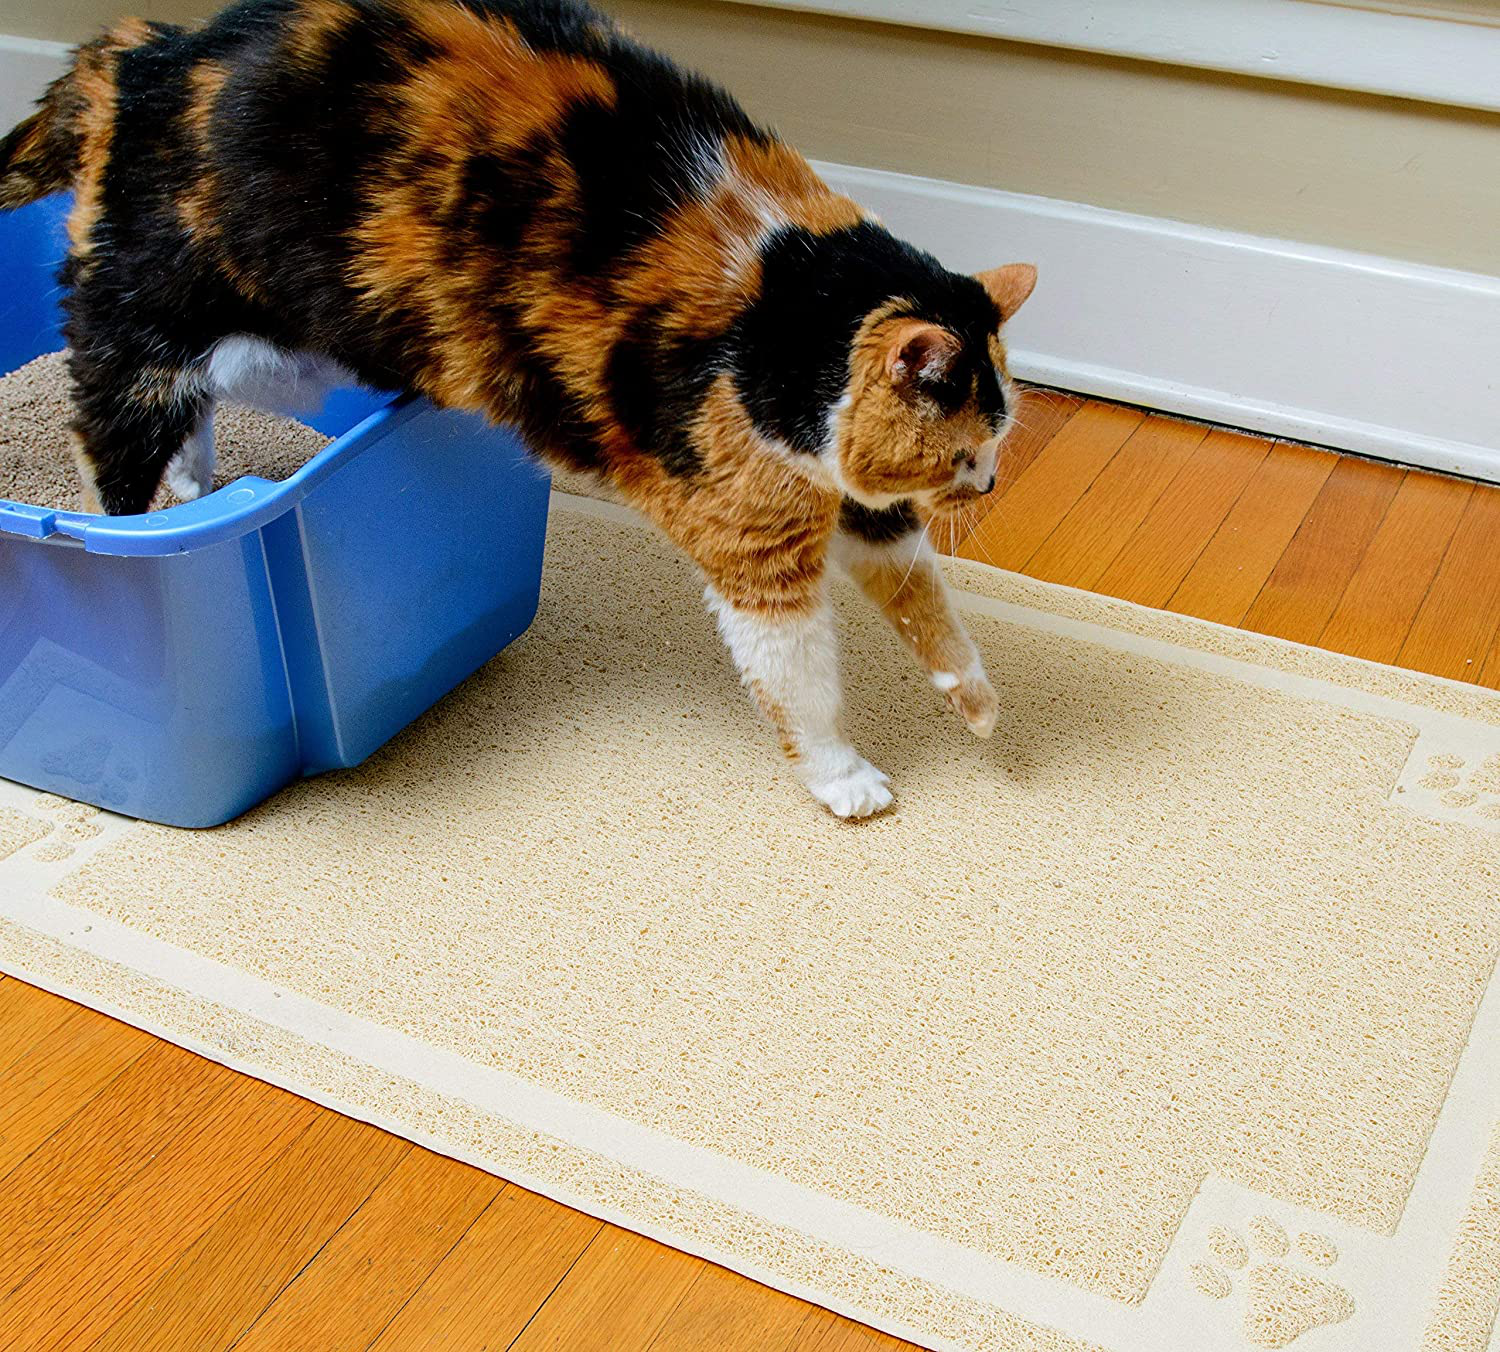 Cat Litter Mat, XL Super size, Phthalate Free, Easy to Clean, Durable, Soft on Paws, Large 47 x 36 Litter Mat.